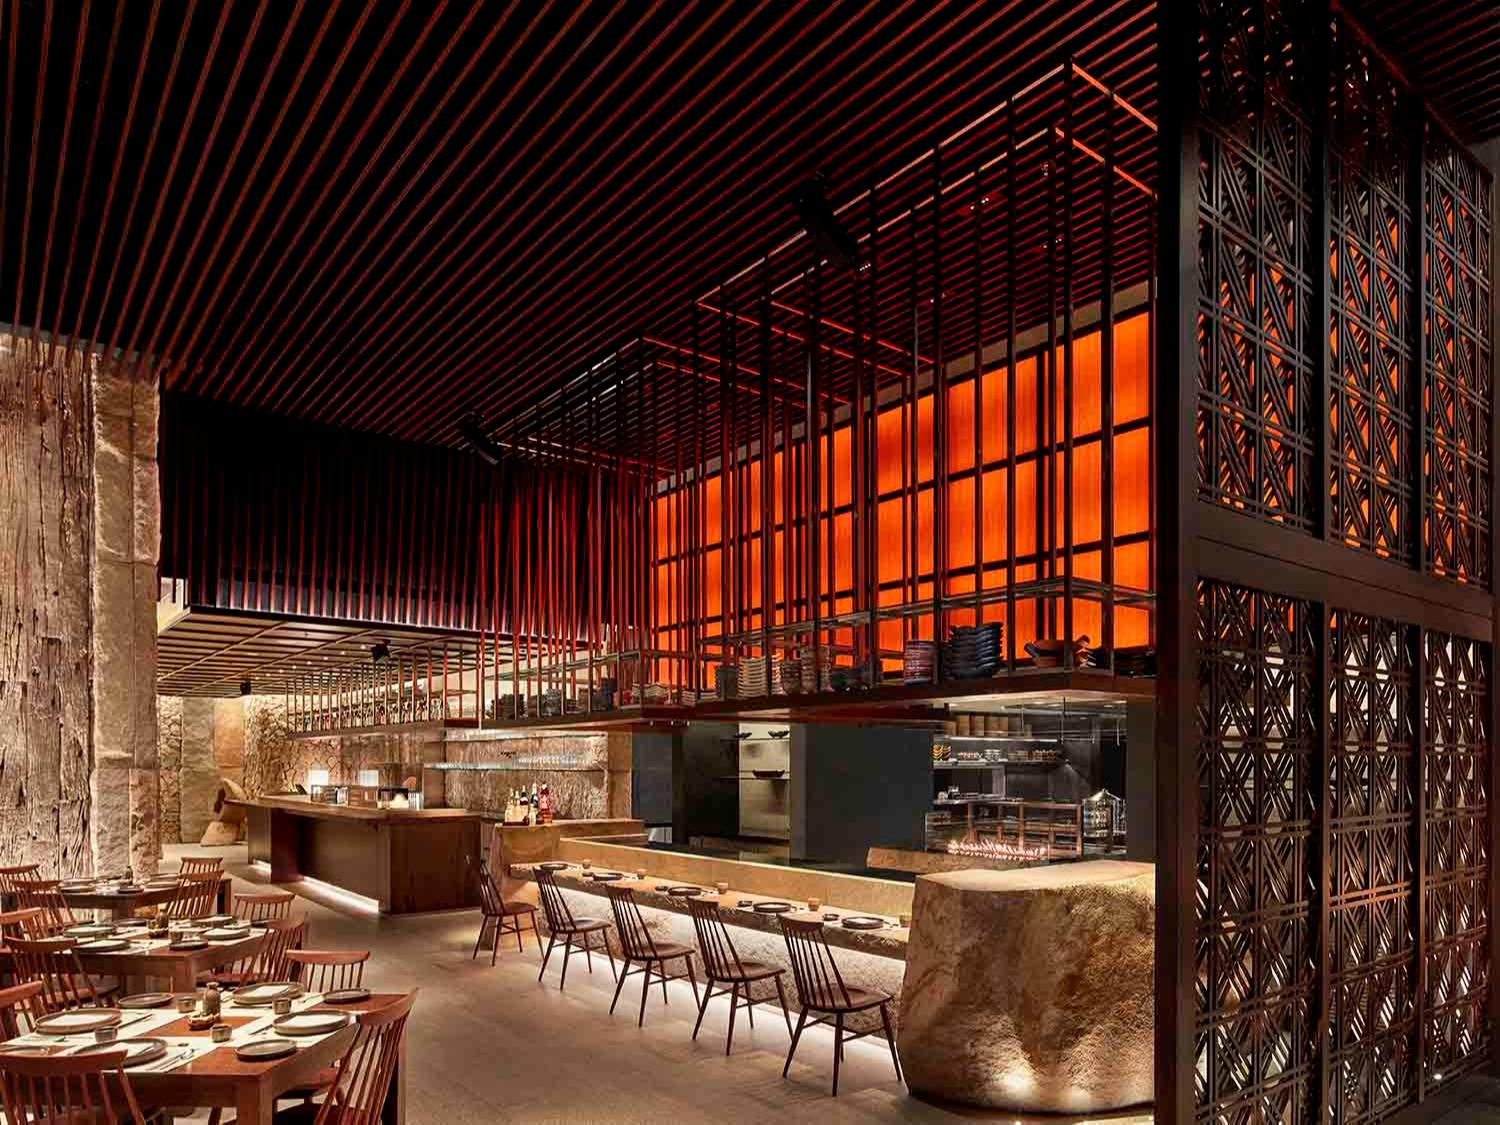 Restaurant area with multiple uplighters and downlights creating dimly-lit, cosy lighting